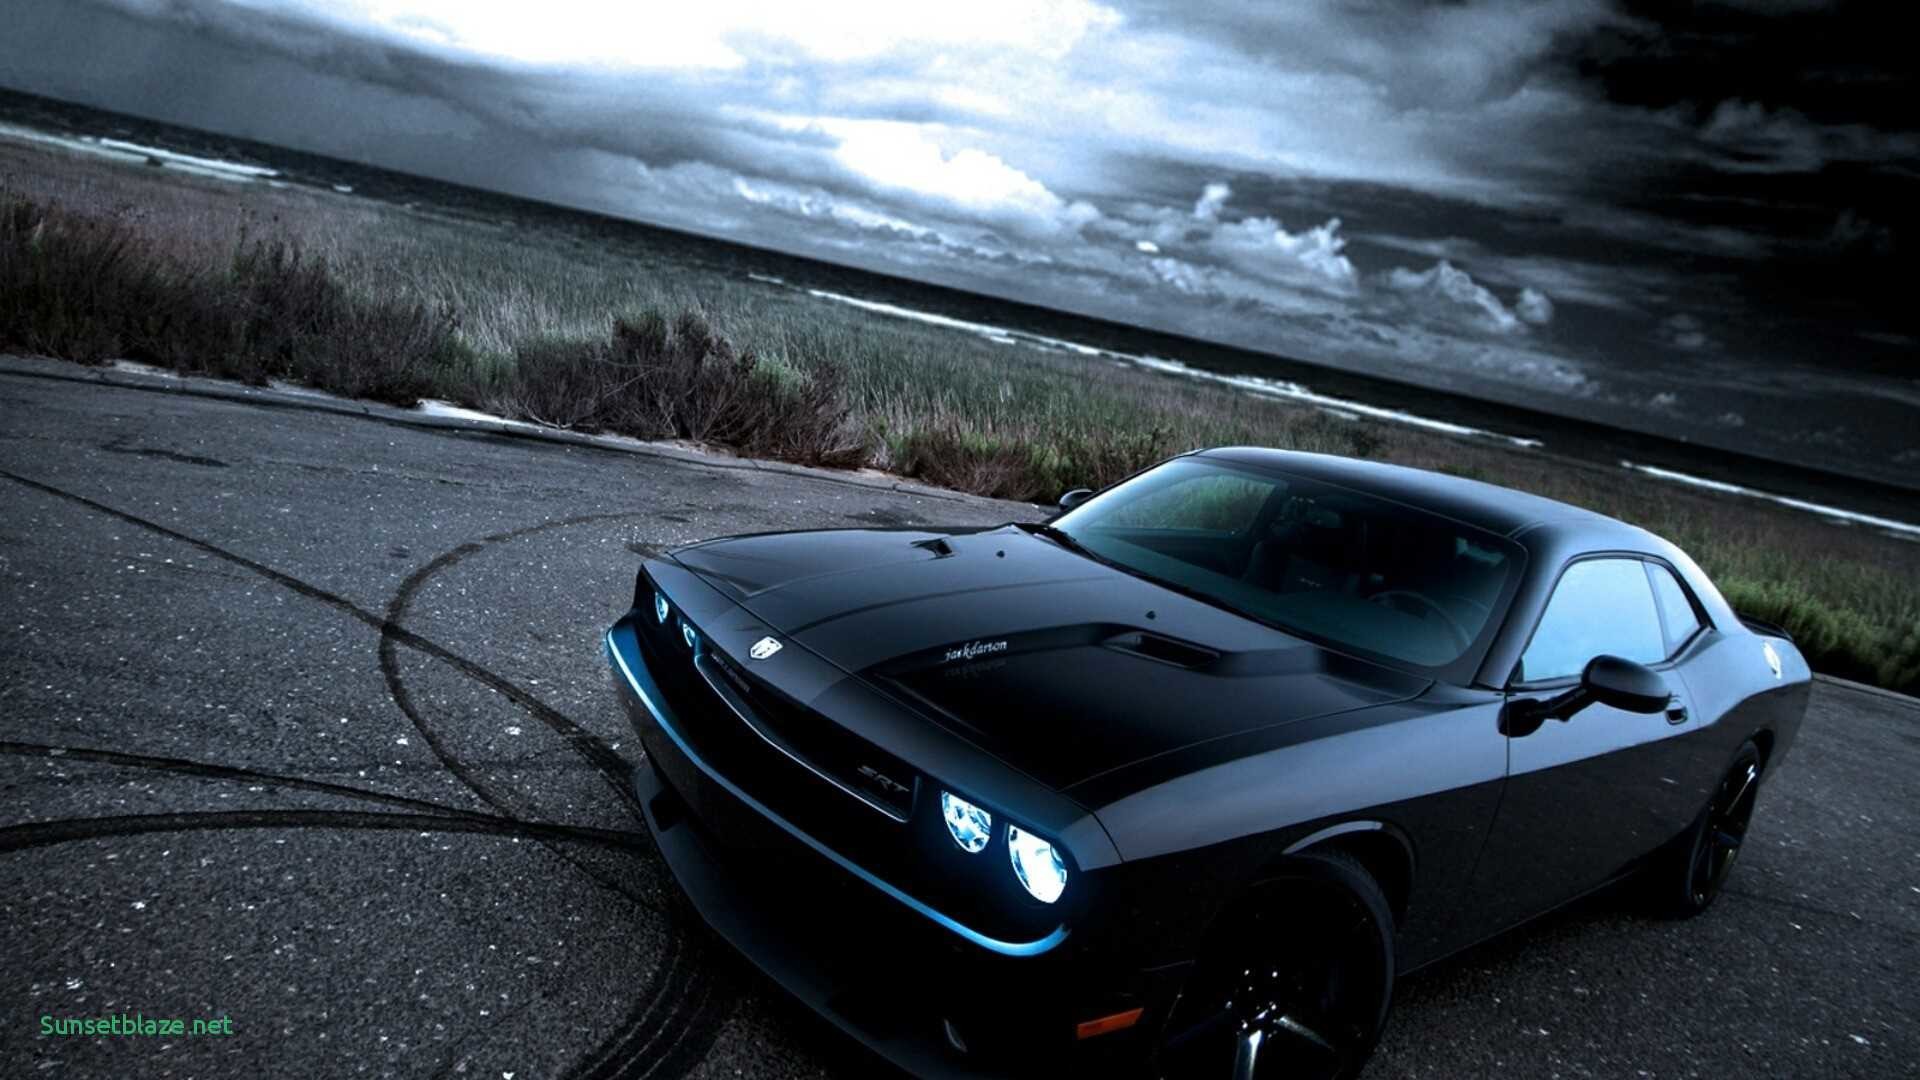 1920x1080 Muscle Cars Wallpapers 70 Images Elegant Of Hd Flat Black Muscle Car  Wallpapers